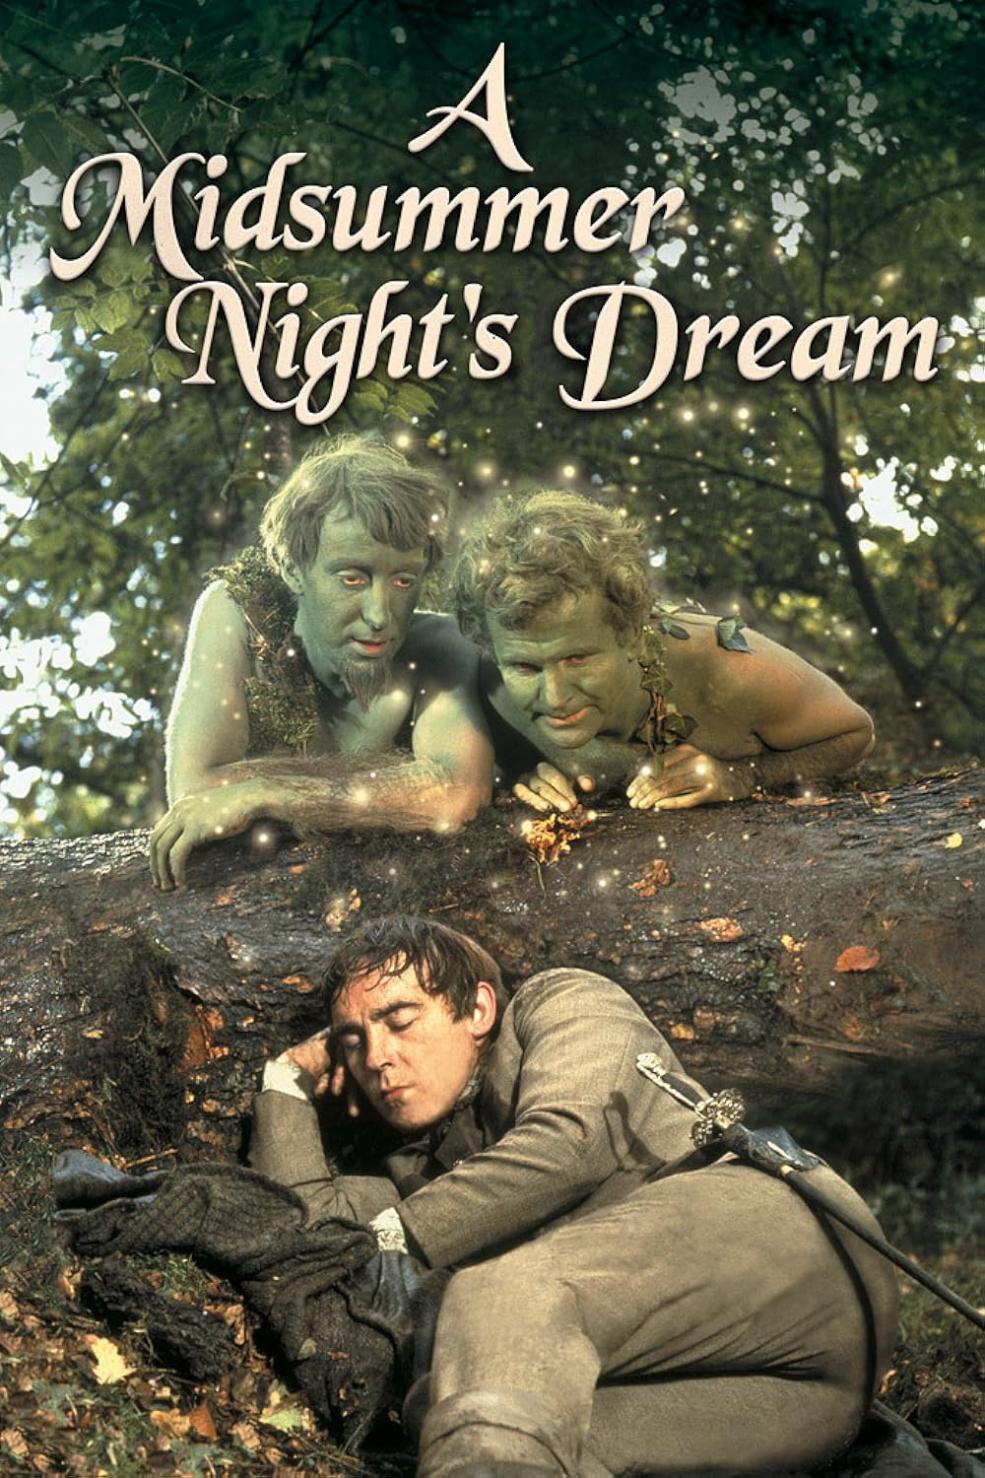 How Do The Characters In A Midsummer Night's Dream Experience Transformation?